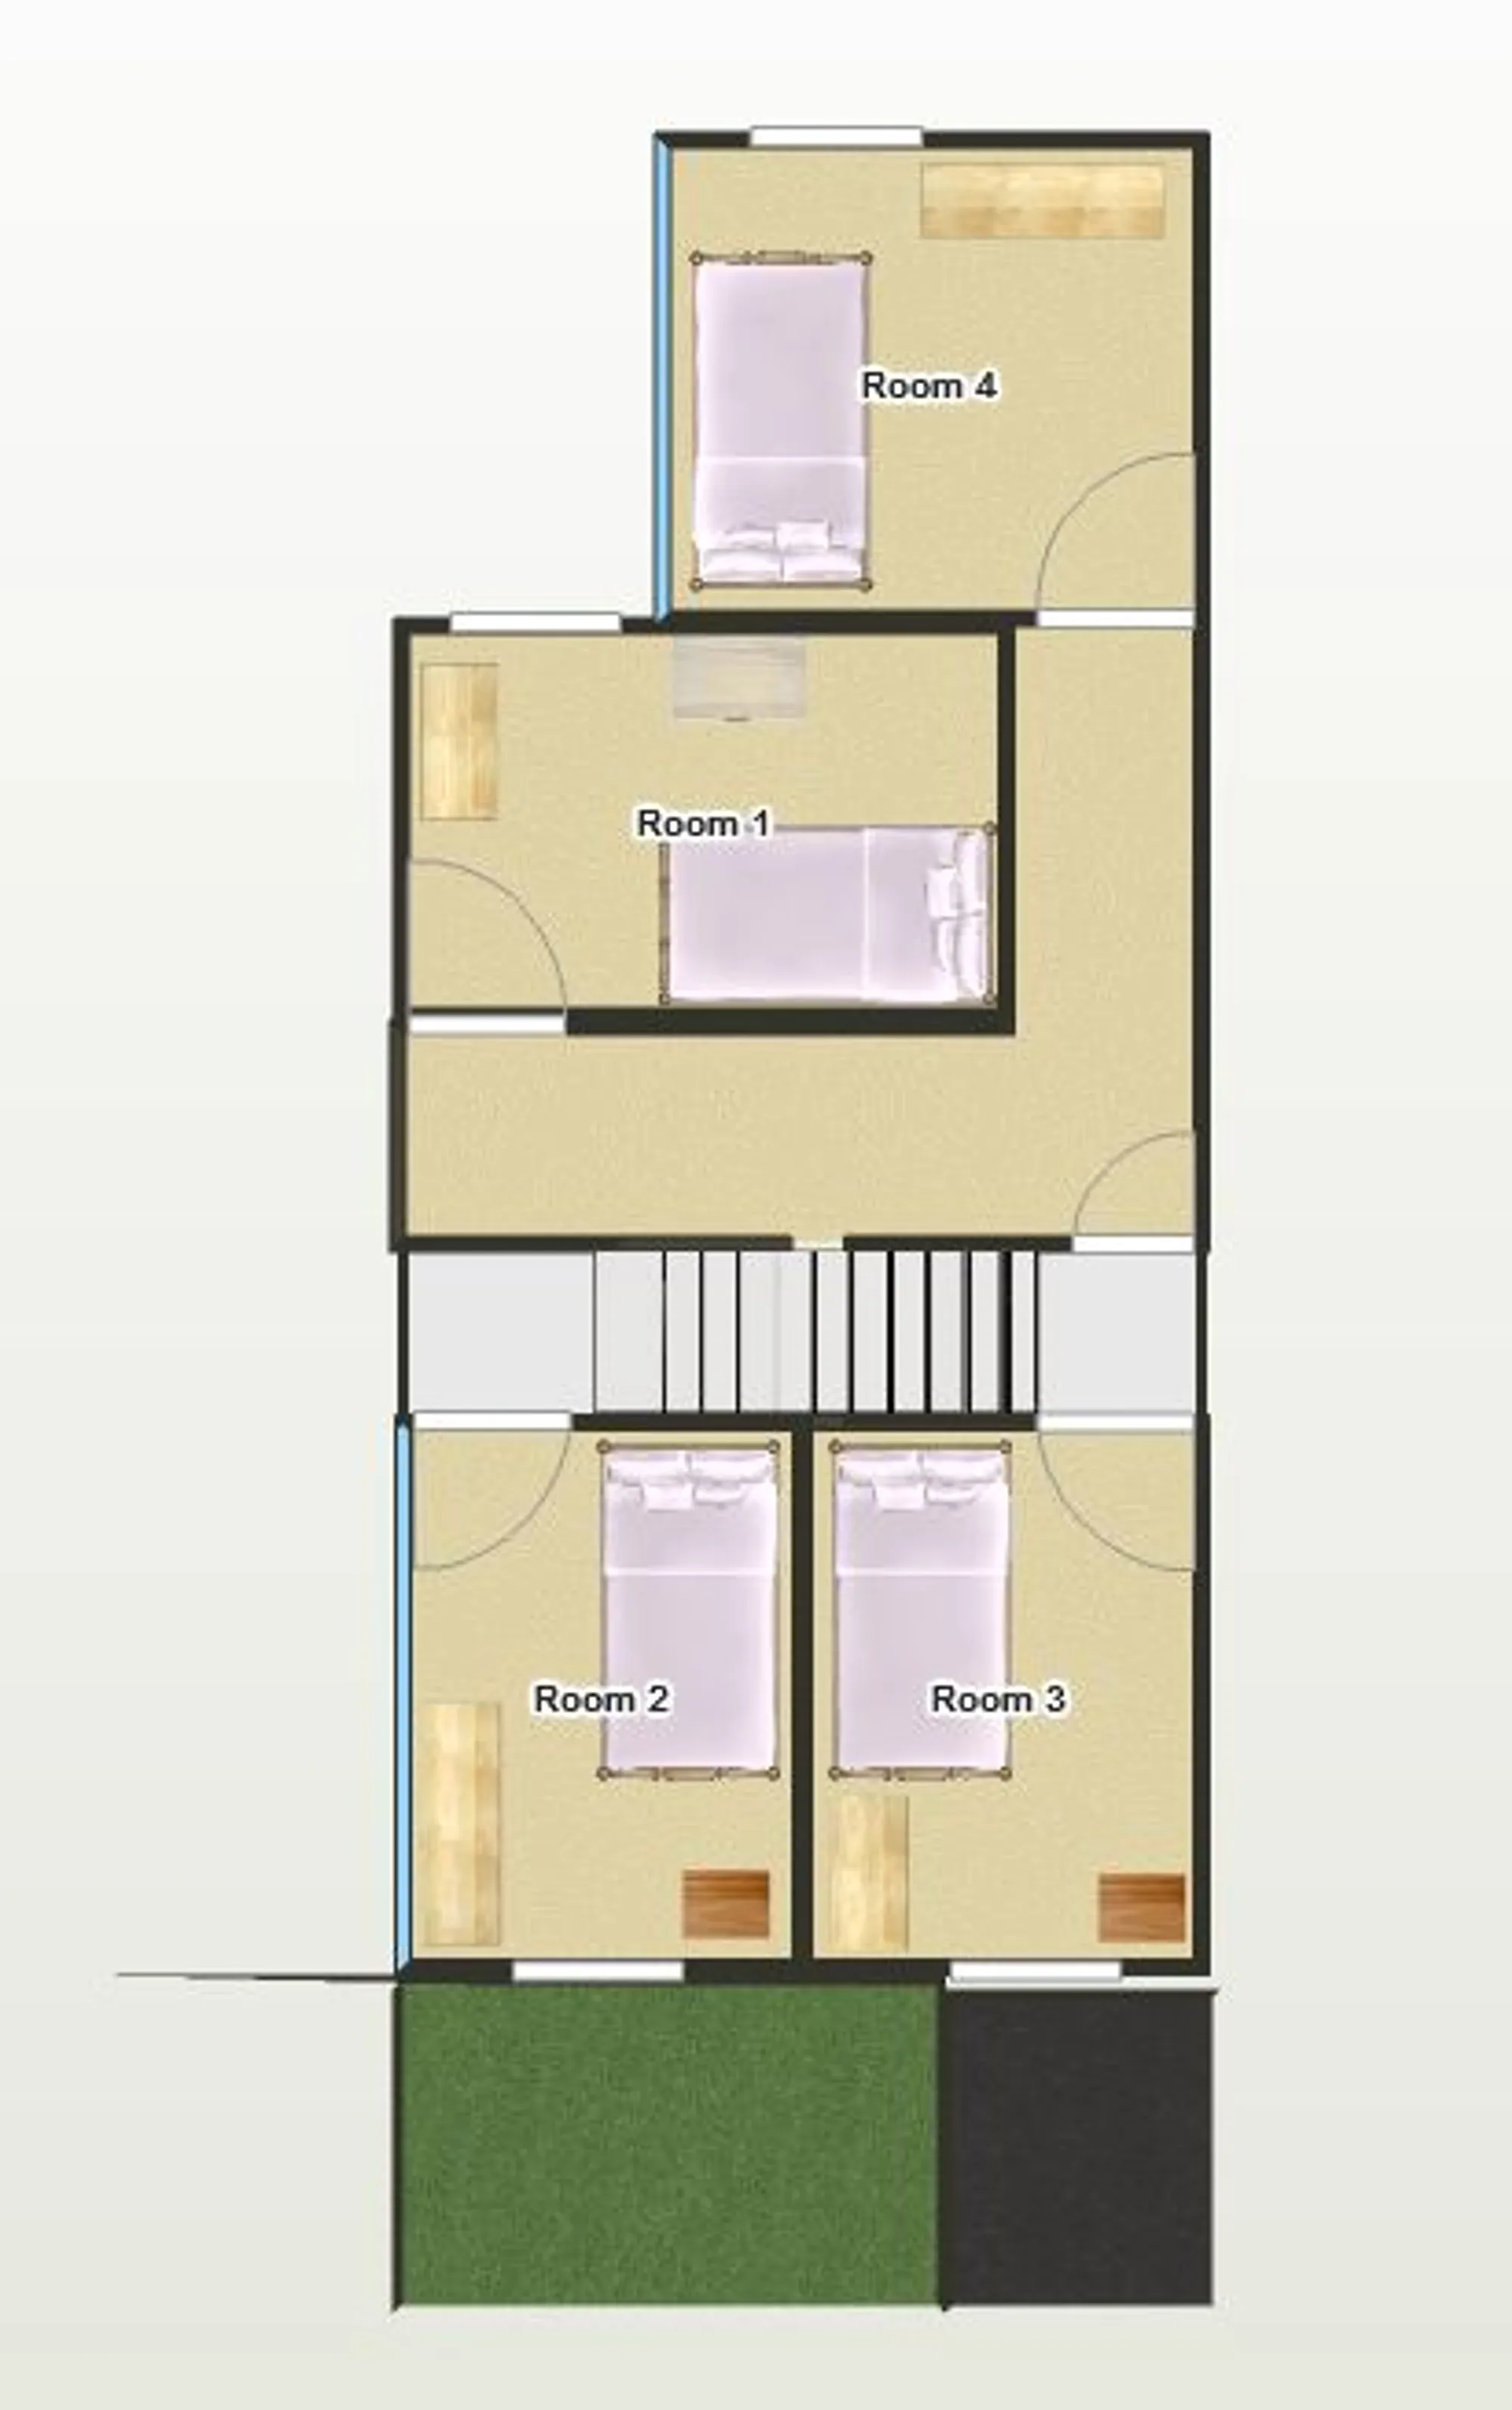 4 bed mid-terraced house to rent in Junction Road, Norwich - Property floorplan